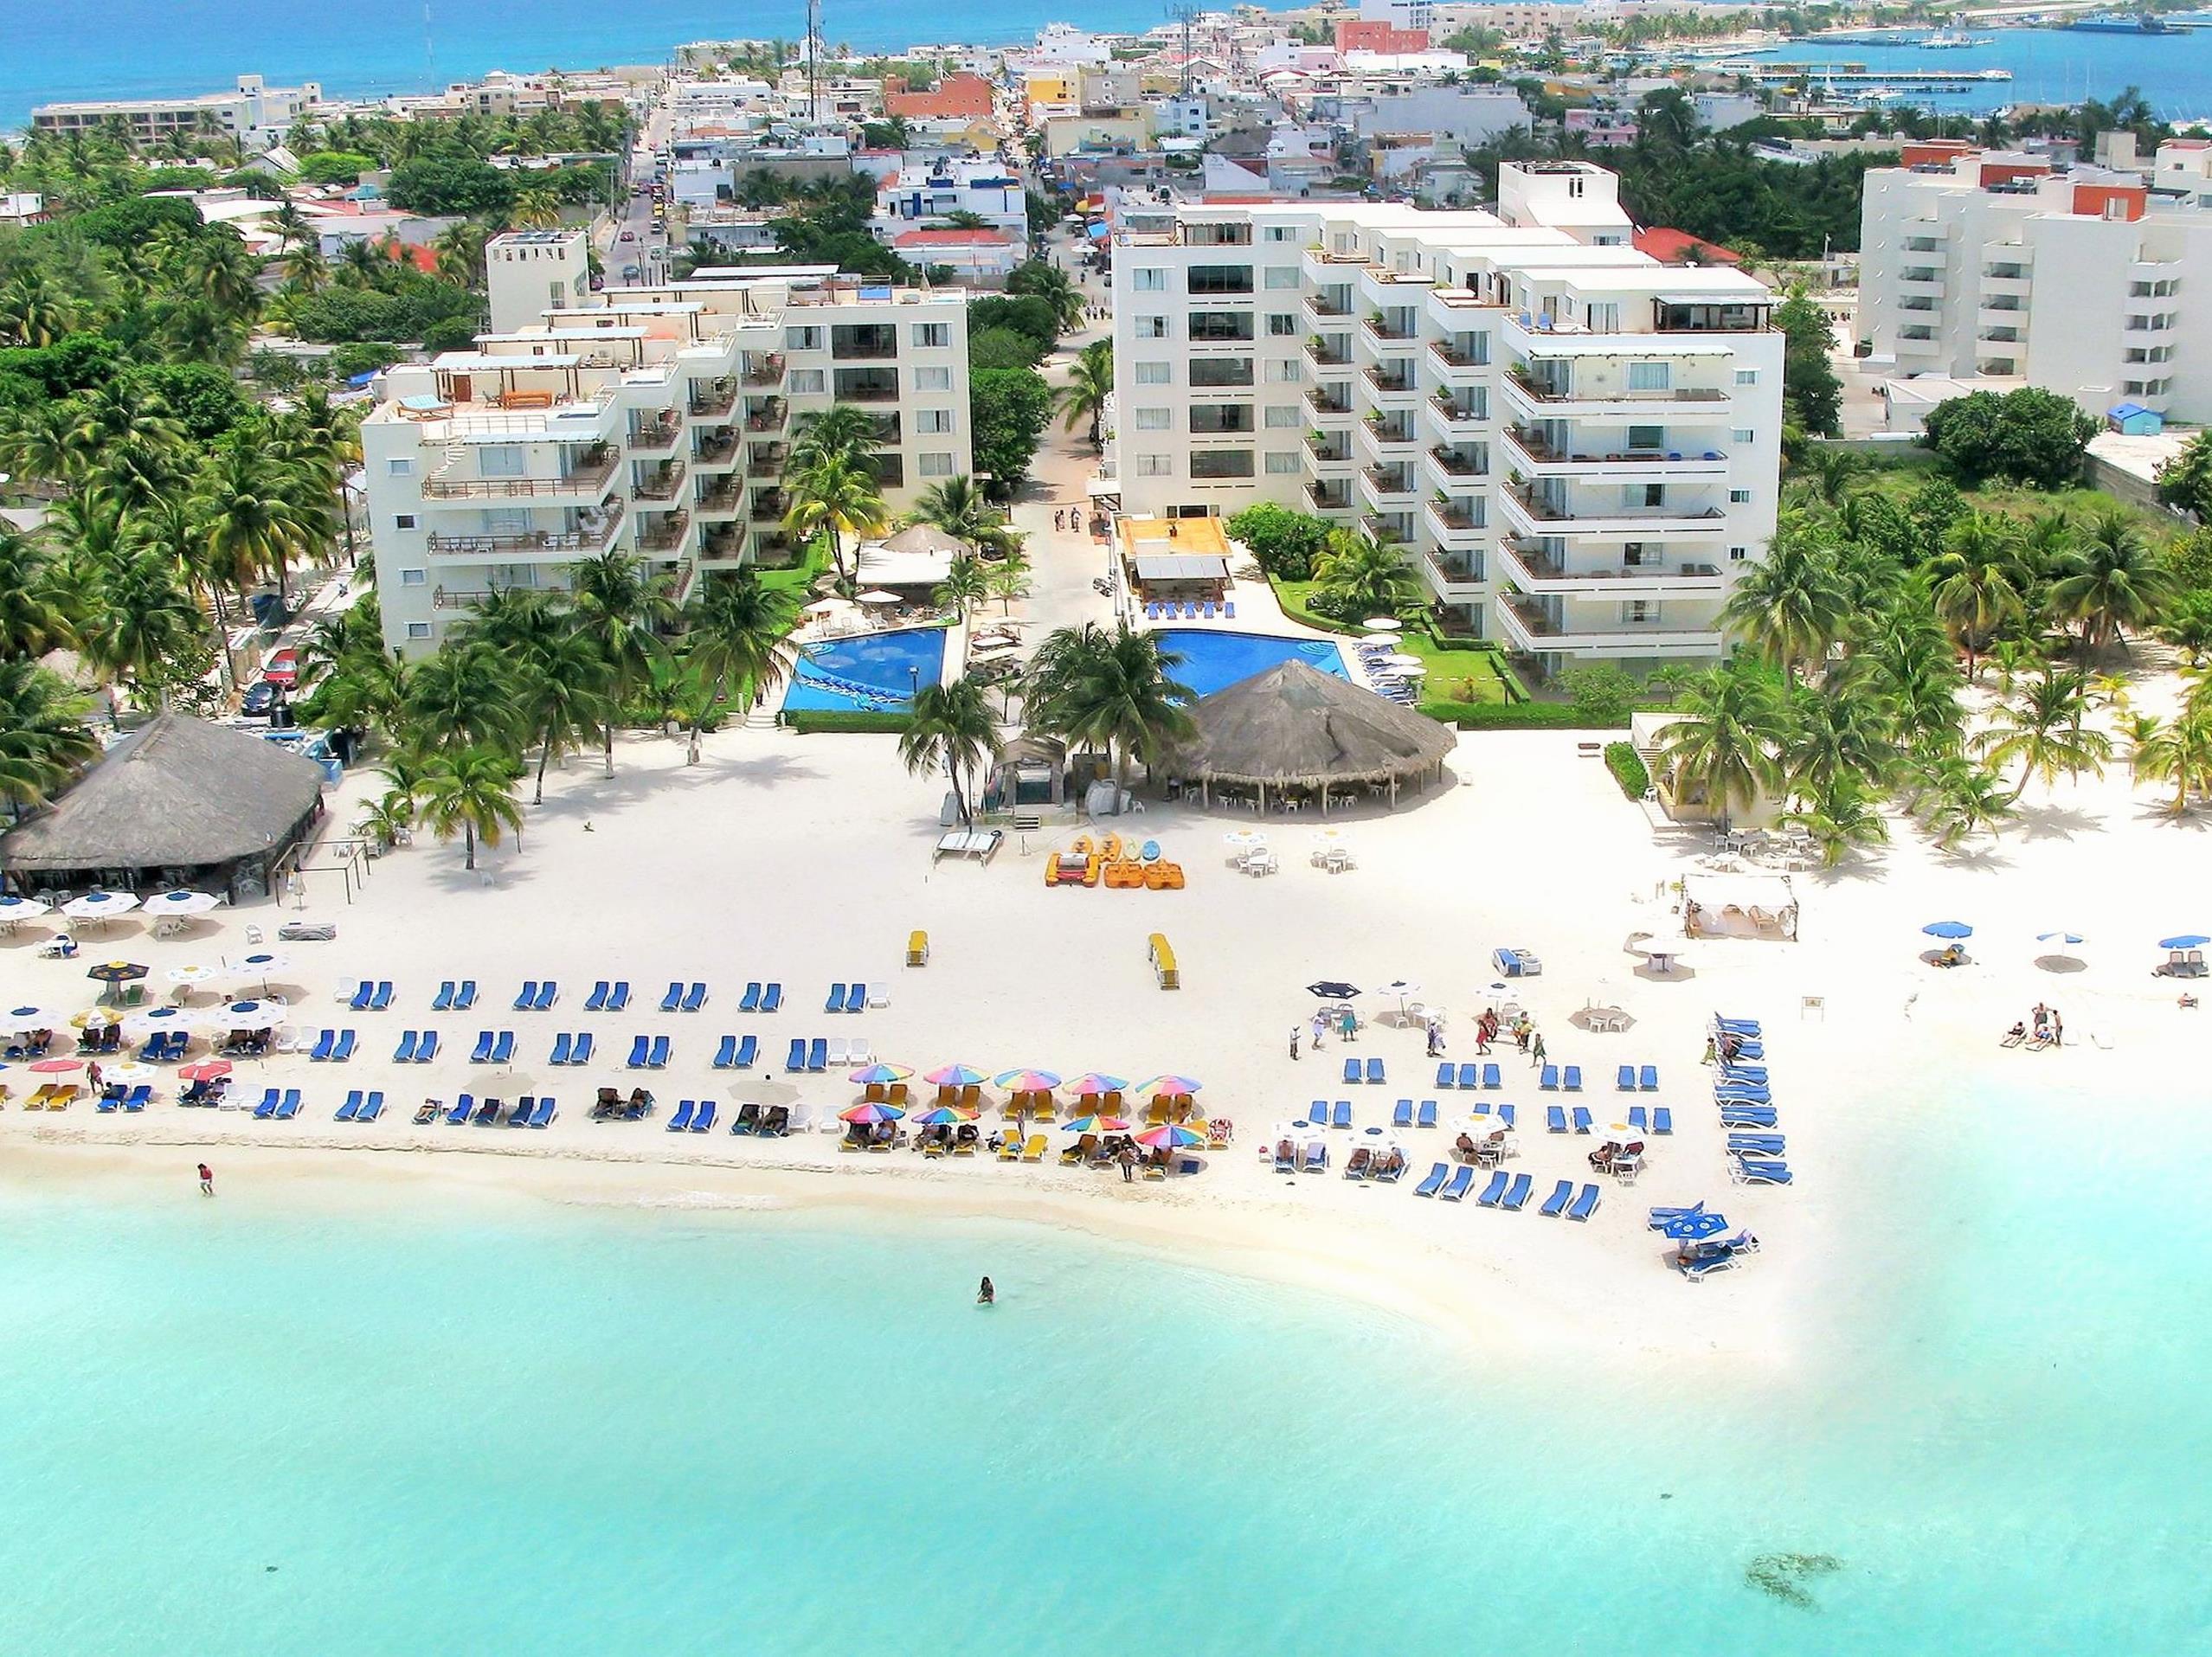 Ixchel Beach Hotel Cancun FAQ 2016, What facilities are there in Ixchel Beach Hotel Cancun 2016, What Languages Spoken are Supported in Ixchel Beach Hotel Cancun 2016, Which payment cards are accepted in Ixchel Beach Hotel Cancun , Cancun Ixchel Beach Hotel room facilities and services Q&A 2016, Cancun Ixchel Beach Hotel online booking services 2016, Cancun Ixchel Beach Hotel address 2016, Cancun Ixchel Beach Hotel telephone number 2016,Cancun Ixchel Beach Hotel map 2016, Cancun Ixchel Beach Hotel traffic guide 2016, how to go Cancun Ixchel Beach Hotel, Cancun Ixchel Beach Hotel booking online 2016, Cancun Ixchel Beach Hotel room types 2016.